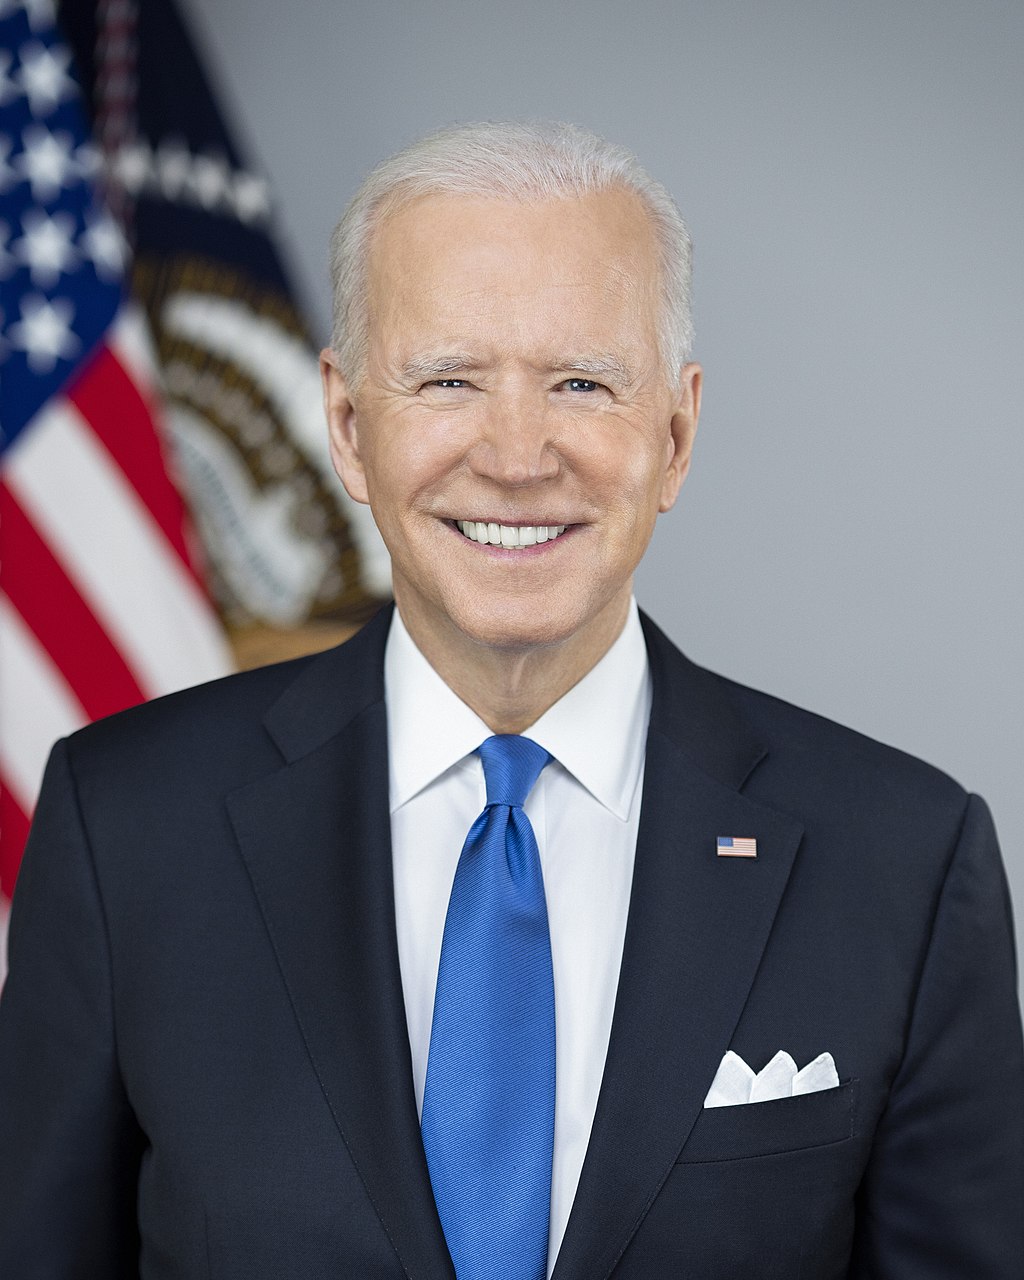 JOE’S HORROR SHOW GOES ON! In this week’s shocking episode, a deeply deluded Biden believes he’s ‘running the world’ and will only stop doing so when his non-existing fantasy friend tells him to — no doctors or medical tests required 😬